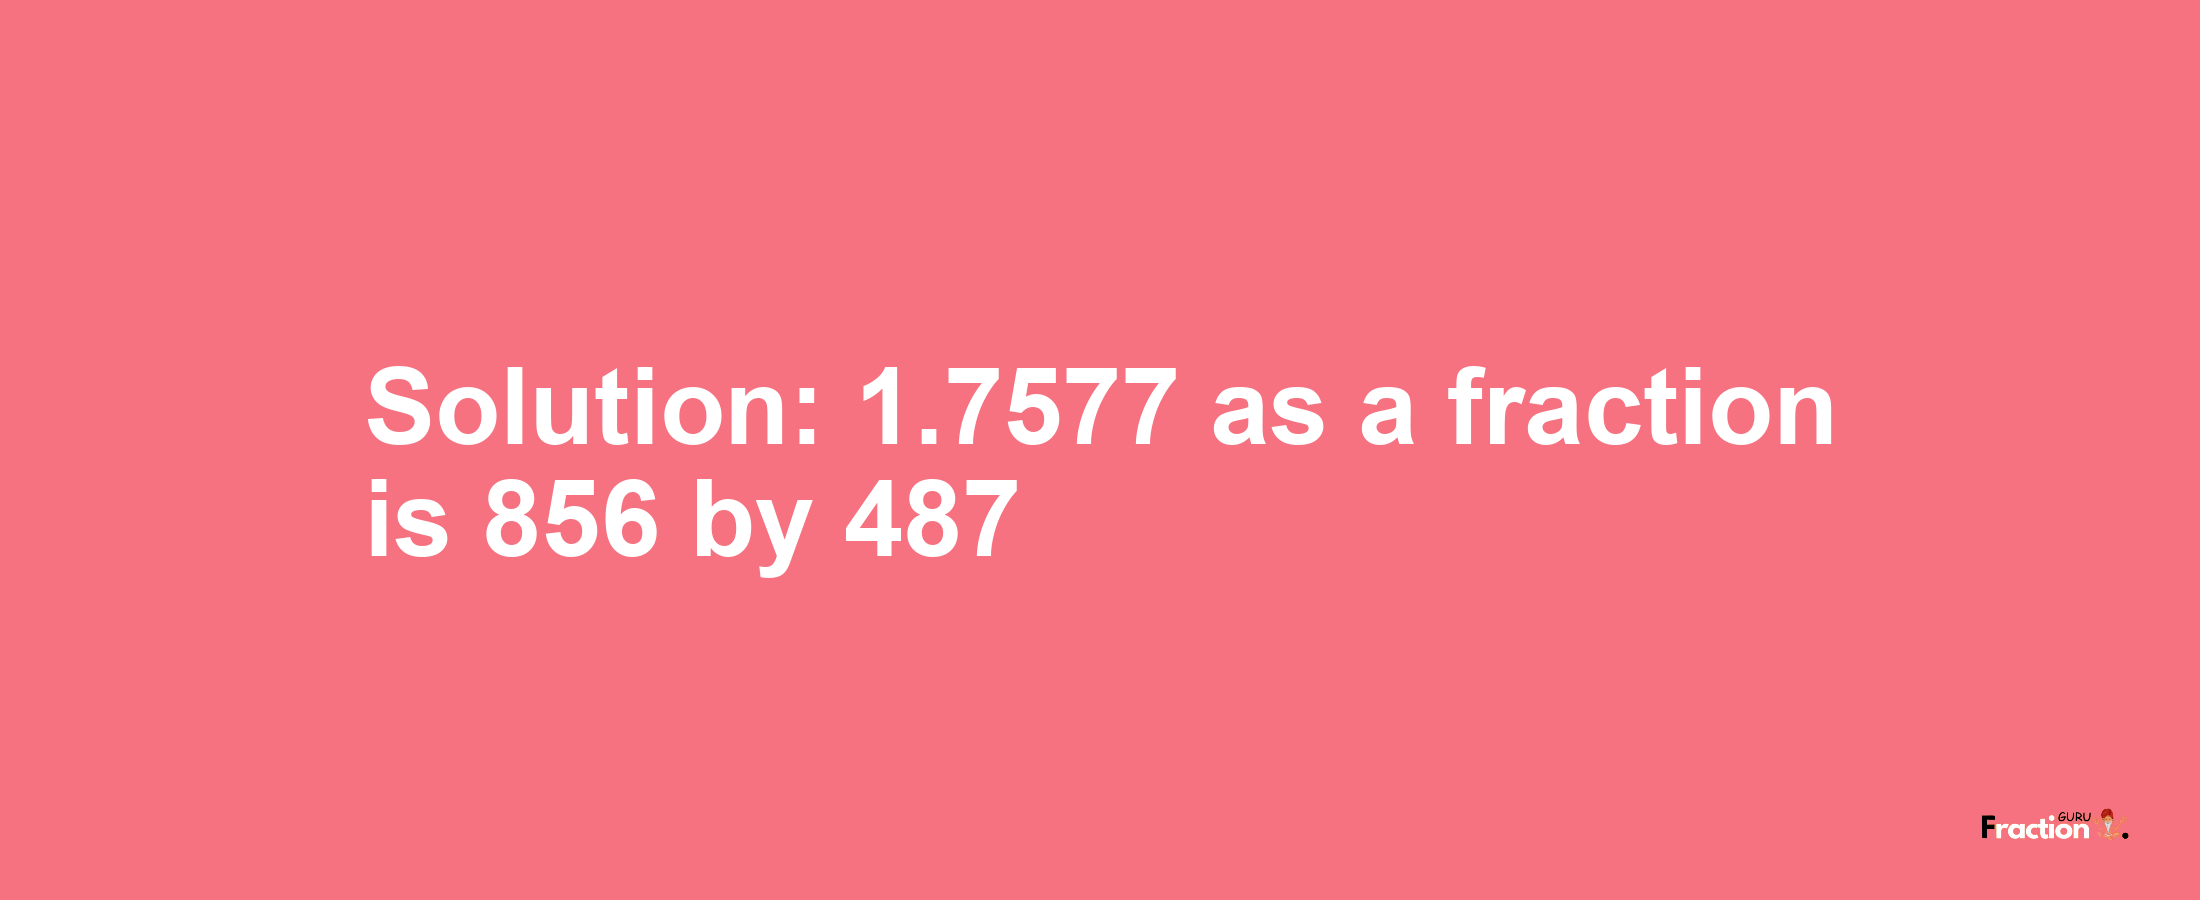 Solution:1.7577 as a fraction is 856/487